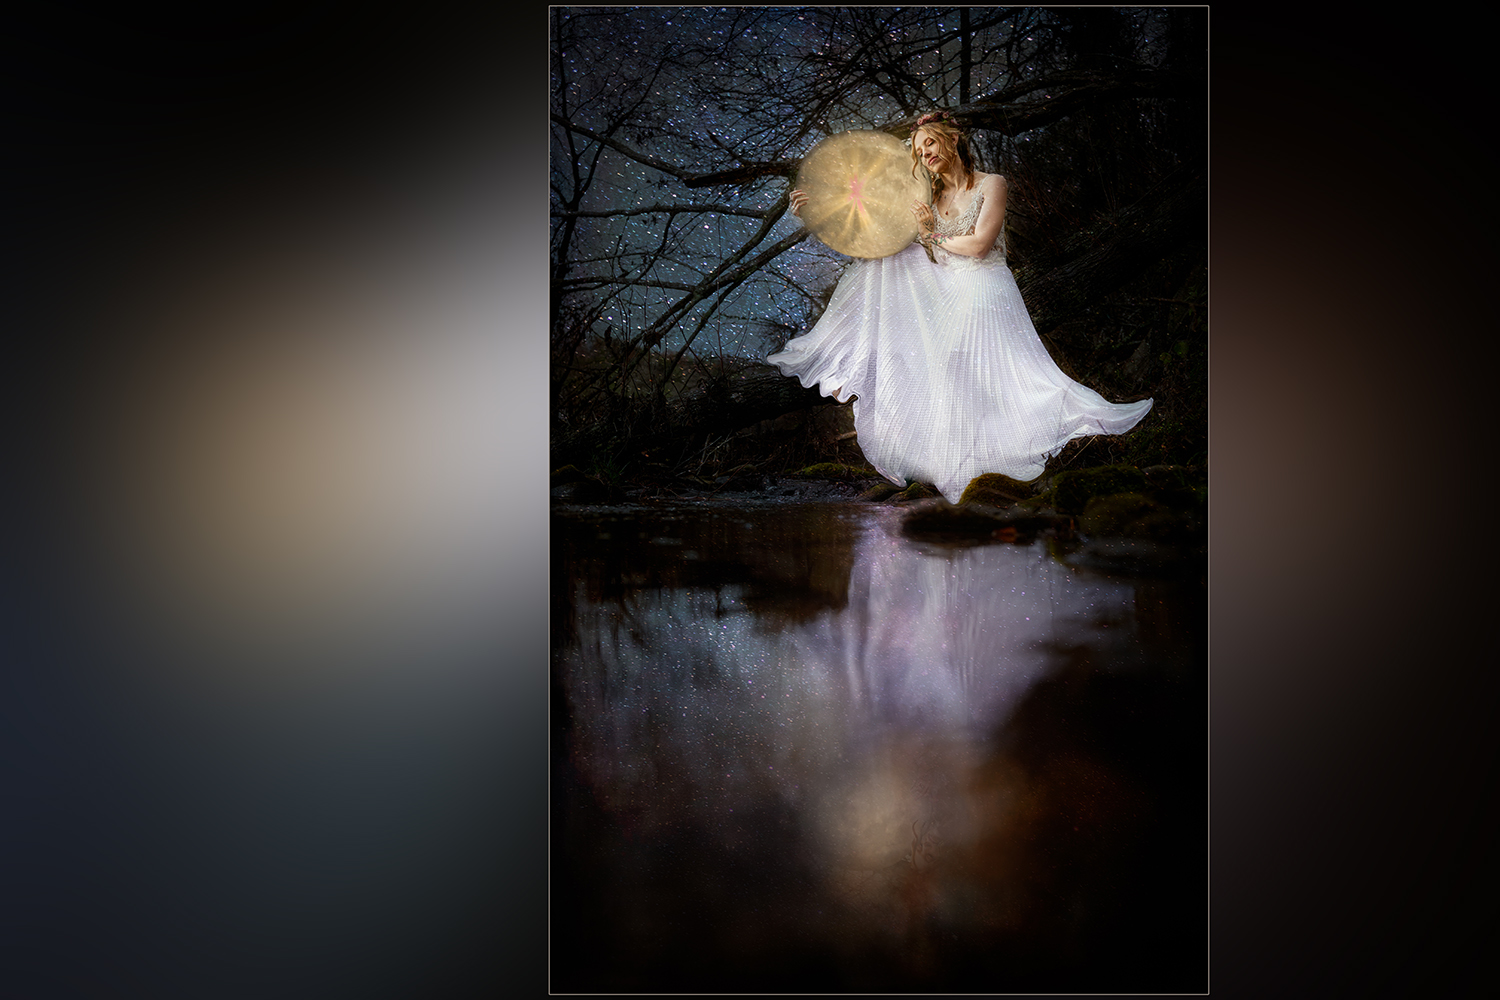 Bride fantasy portrait holding the moon with a soft reflection in a creek under the night sky with stars